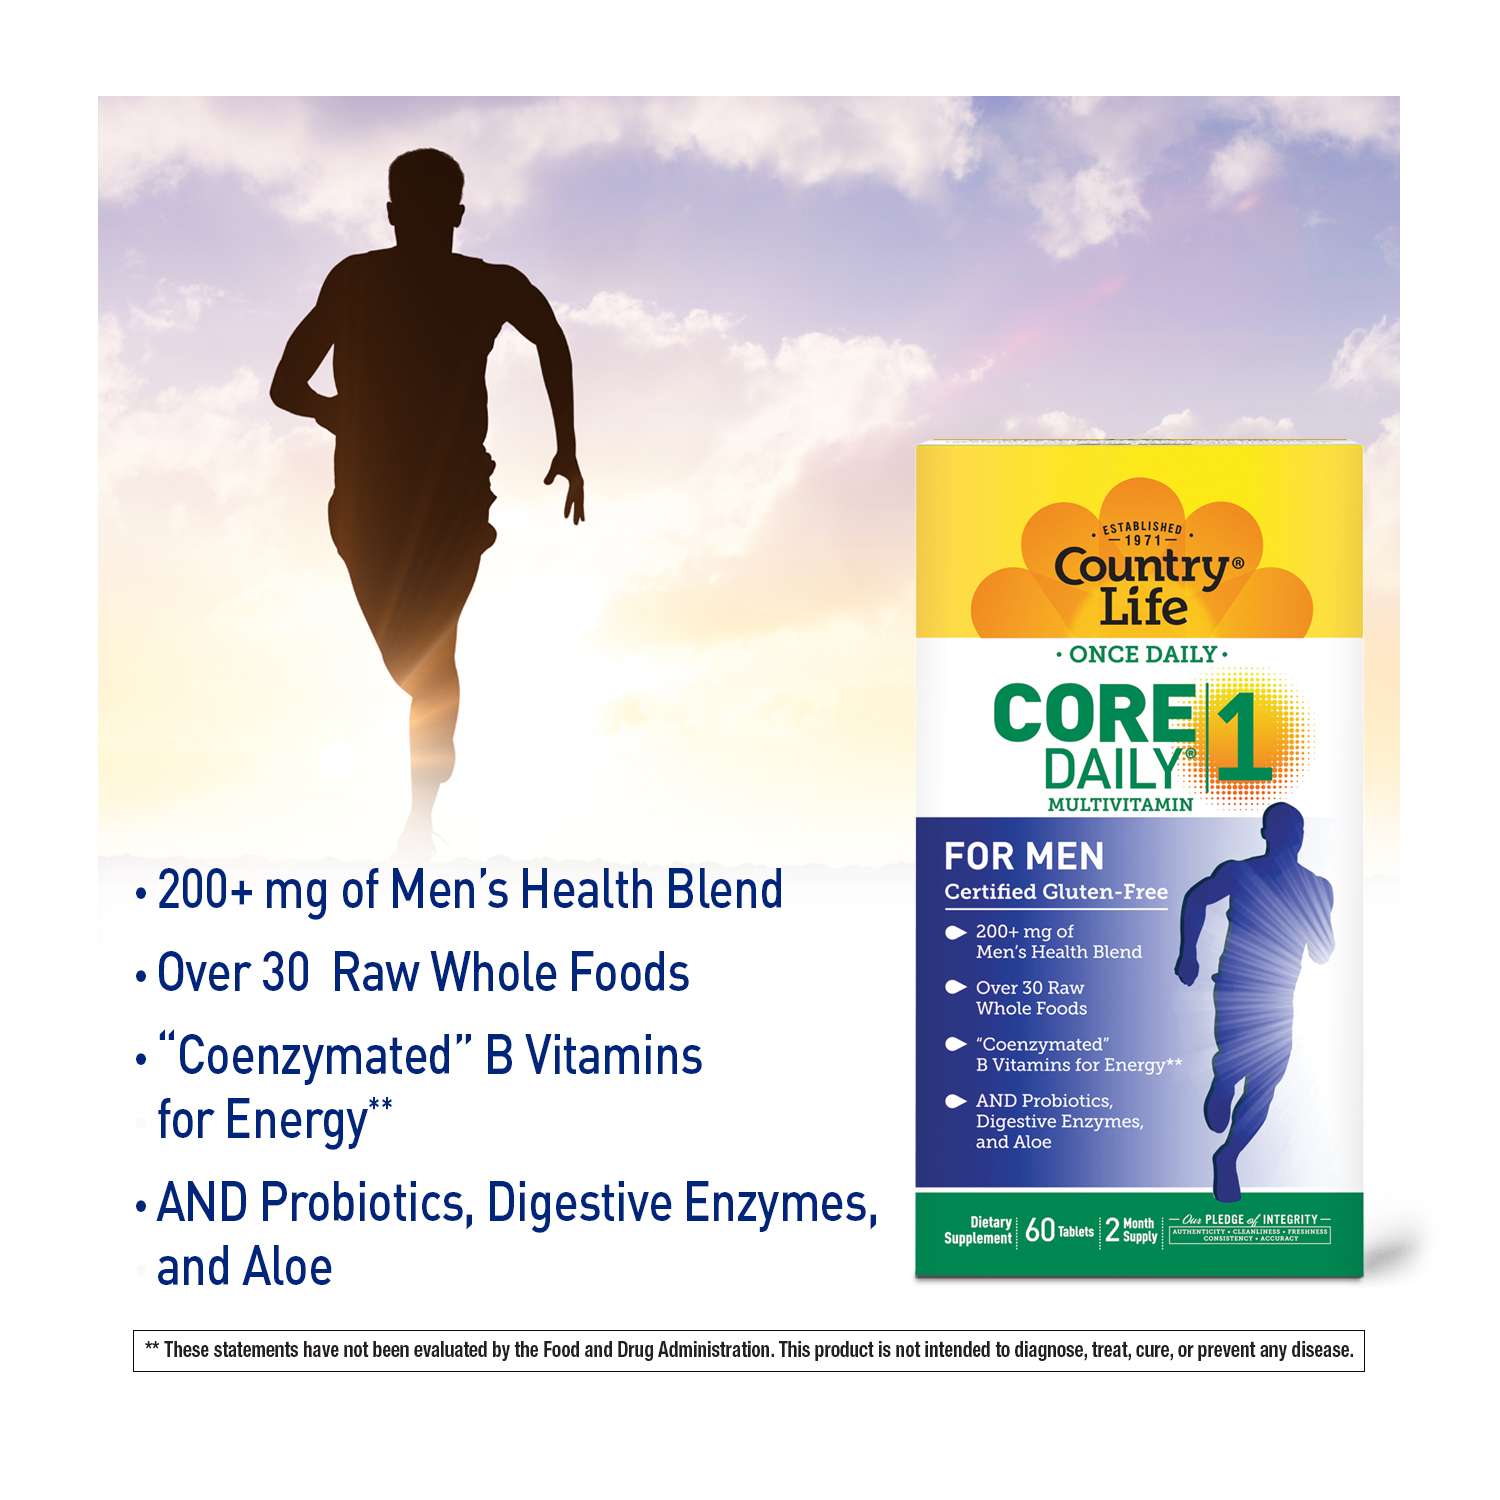 Core Daily-1® Daily Multivitamin For Men